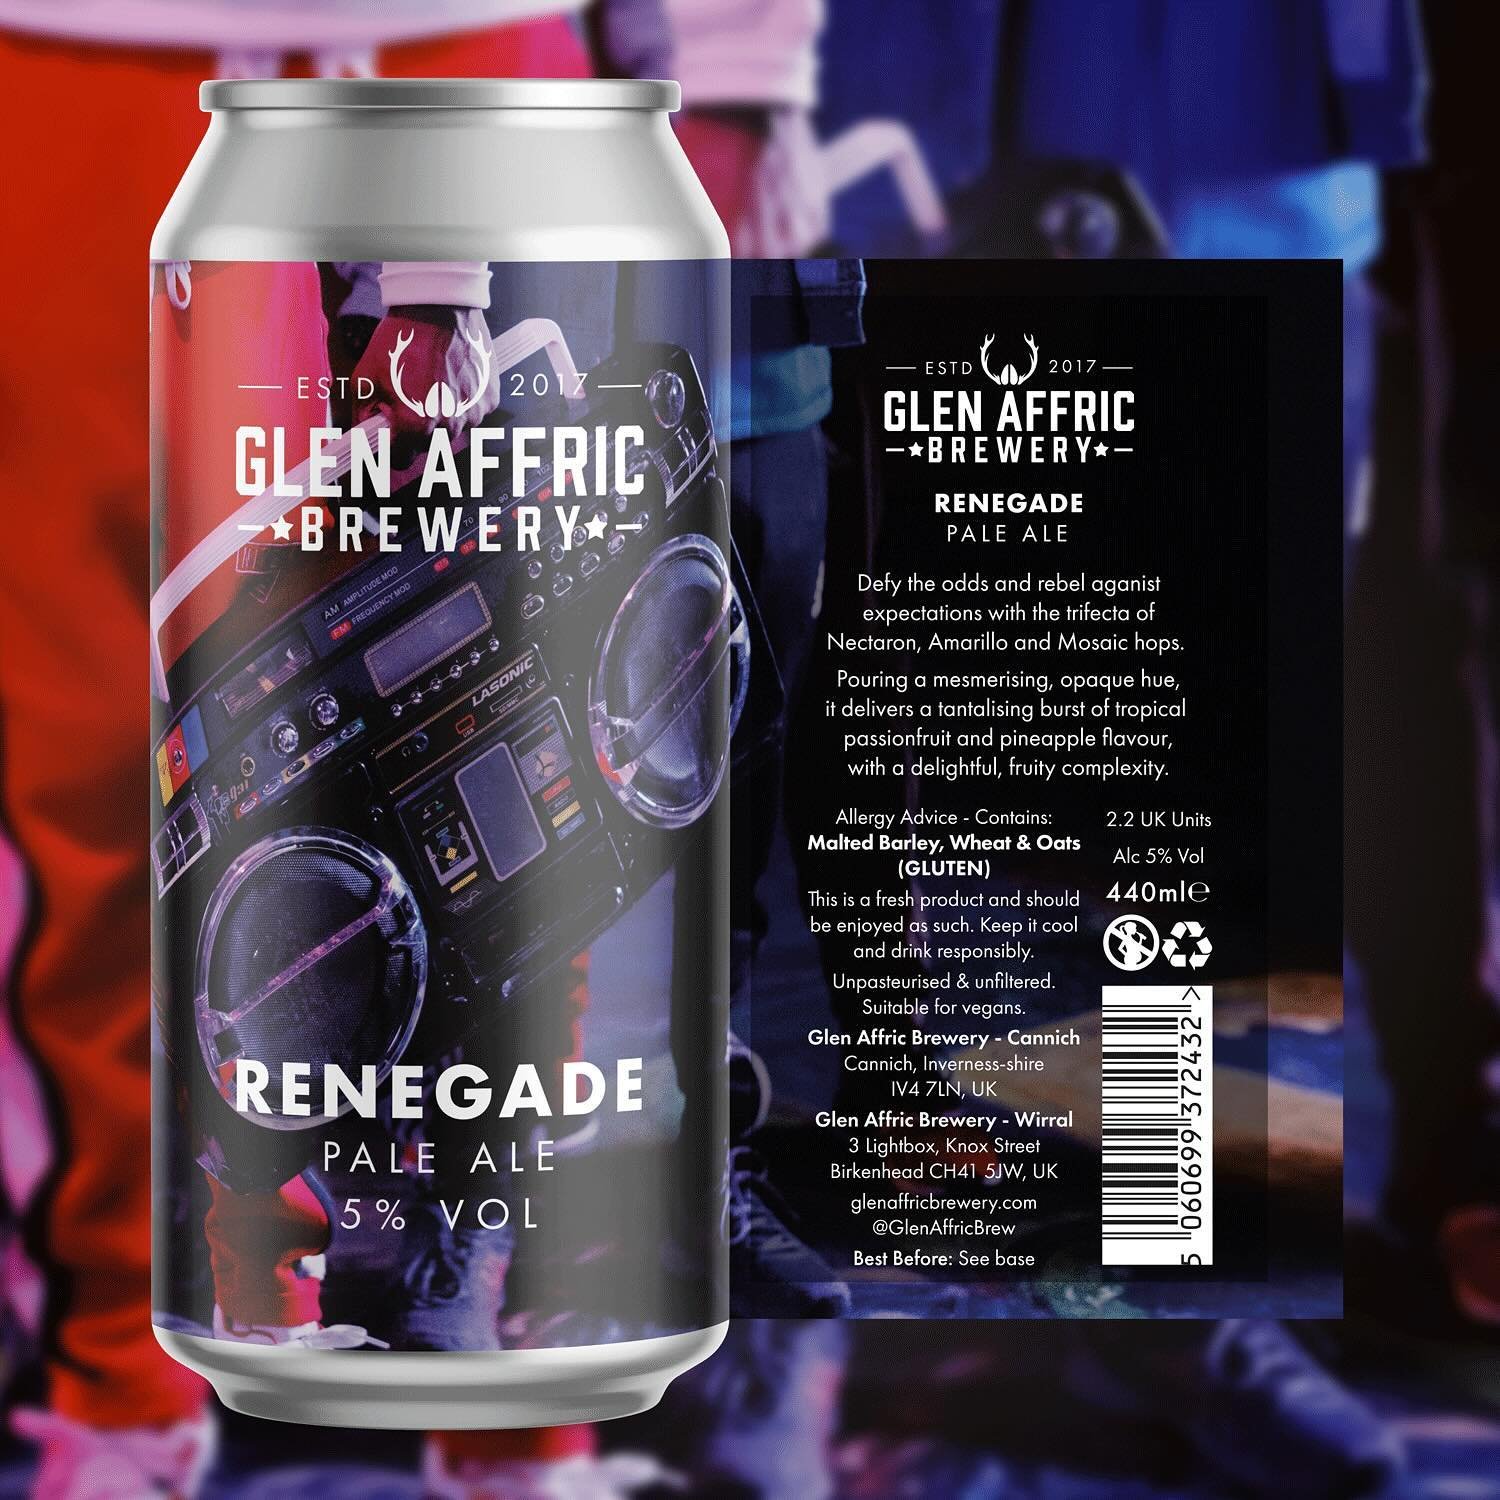 🚨NEW BEER TODAY
🎸RENEGADE // 5% PALE ALE

Defy the odds and rebel against expectations with the trifecta of Nectaron, Amarillo and Mosaic hops. 

Pouring a mesmerising, opaque hue, it delivers a tantalising burst of tropical passionfruit and pineap